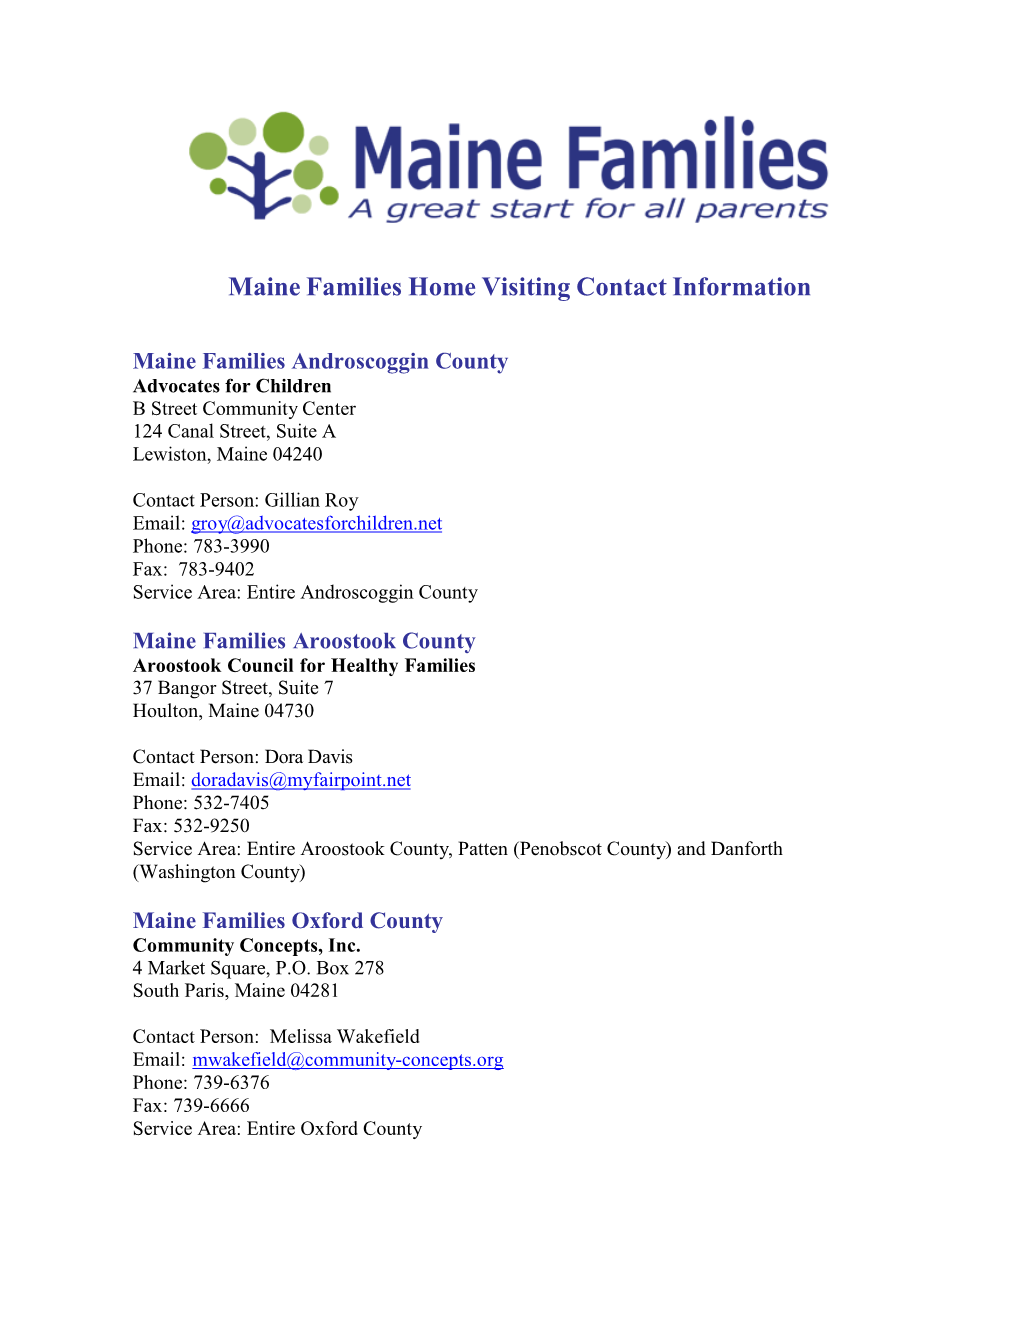 Maine Families Home Visiting Contact Information